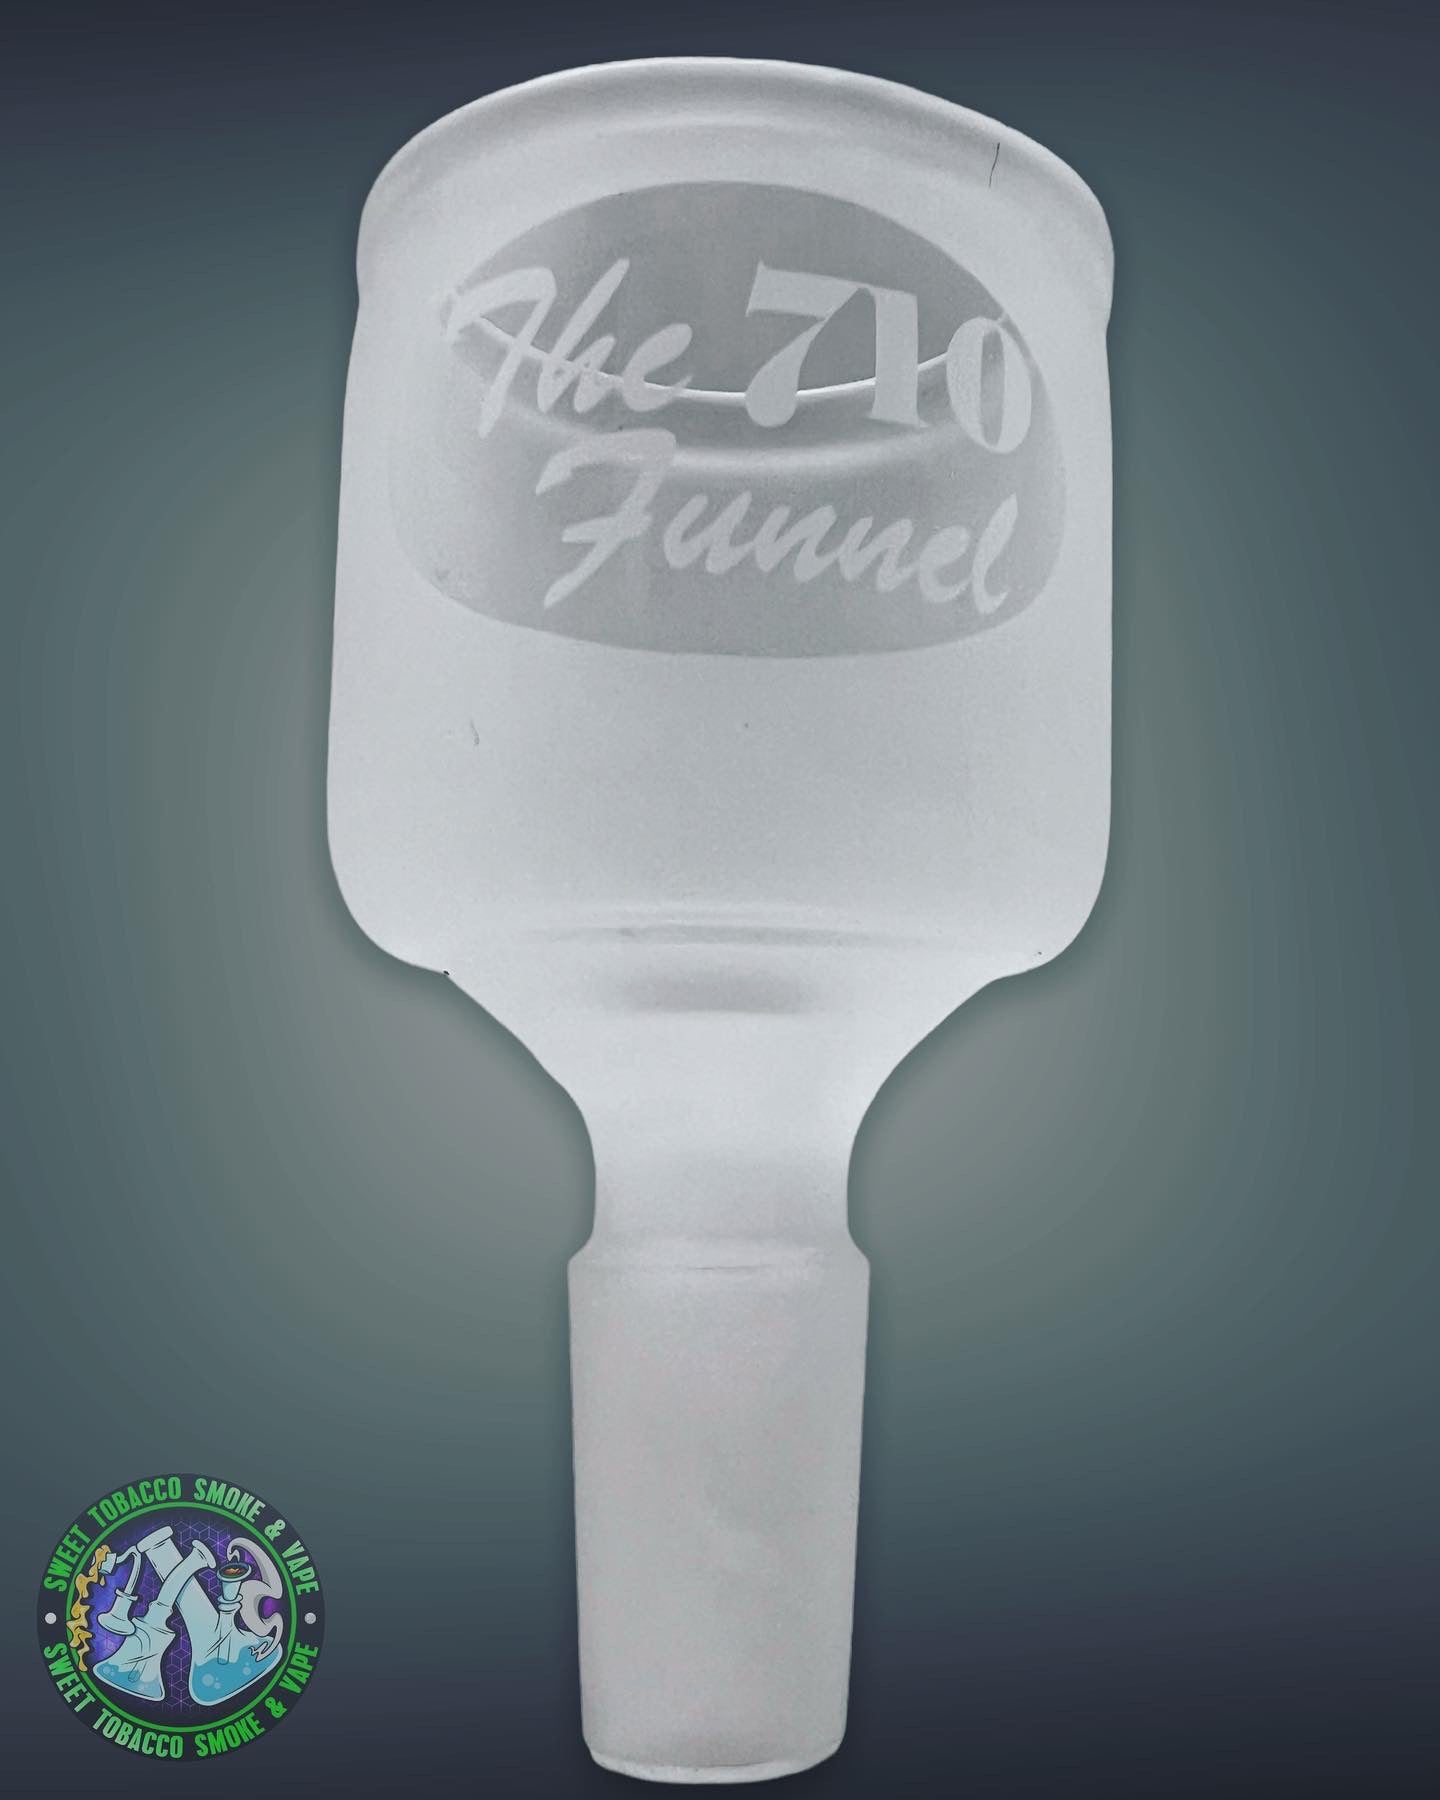 The 710 Funnel